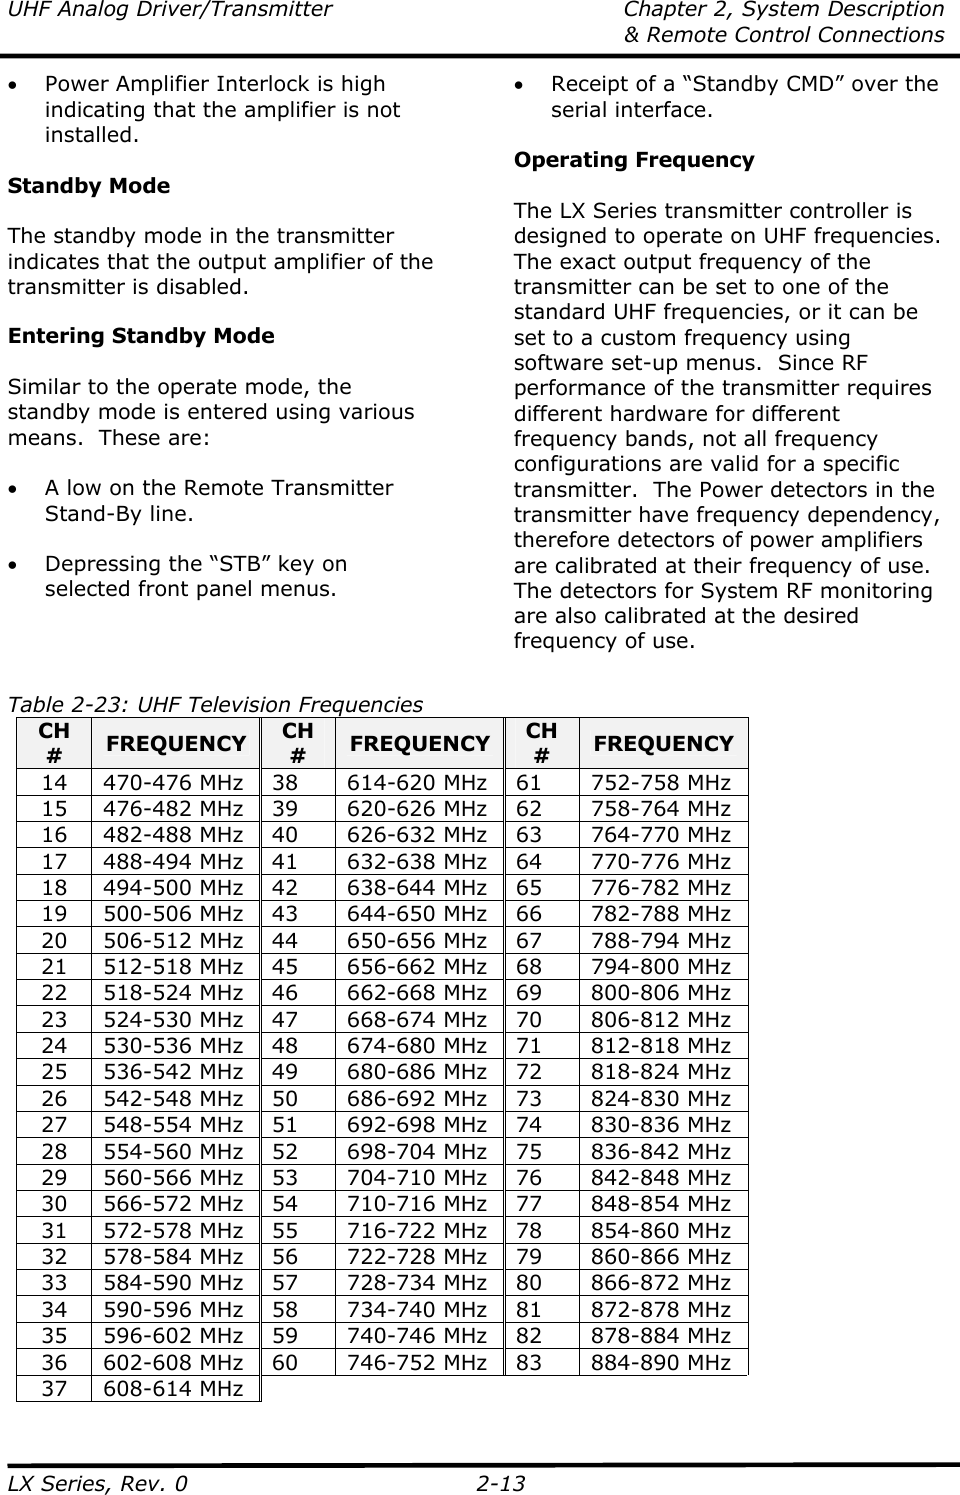 UHF Analog Driver/Transmitter  Chapter 2, System Description   &amp; Remote Control Connections LX Series, Rev. 0  2-13 • Power Amplifier Interlock is high indicating that the amplifier is not installed.  Standby Mode  The standby mode in the transmitter indicates that the output amplifier of the transmitter is disabled.   Entering Standby Mode  Similar to the operate mode, the standby mode is entered using various means.  These are:  • A low on the Remote Transmitter Stand-By line.  • Depressing the “STB” key on selected front panel menus.   • Receipt of a “Standby CMD” over the serial interface.  Operating Frequency  The LX Series transmitter controller is designed to operate on UHF frequencies.  The exact output frequency of the transmitter can be set to one of the standard UHF frequencies, or it can be set to a custom frequency using software set-up menus.  Since RF performance of the transmitter requires different hardware for different frequency bands, not all frequency configurations are valid for a specific transmitter.  The Power detectors in the transmitter have frequency dependency, therefore detectors of power amplifiers are calibrated at their frequency of use.  The detectors for System RF monitoring are also calibrated at the desired frequency of use.  Table 2-23: UHF Television Frequencies CH #  FREQUENCY  CH #  FREQUENCY  CH #  FREQUENCY 14  470-476 MHz  38  614-620 MHz  61  752-758 MHz 15  476-482 MHz  39  620-626 MHz  62  758-764 MHz 16  482-488 MHz  40  626-632 MHz  63  764-770 MHz 17  488-494 MHz  41  632-638 MHz  64  770-776 MHz 18  494-500 MHz  42  638-644 MHz  65  776-782 MHz 19  500-506 MHz  43  644-650 MHz  66  782-788 MHz 20  506-512 MHz  44  650-656 MHz  67  788-794 MHz 21  512-518 MHz  45  656-662 MHz  68  794-800 MHz 22  518-524 MHz  46  662-668 MHz  69  800-806 MHz 23  524-530 MHz  47  668-674 MHz  70  806-812 MHz 24  530-536 MHz  48  674-680 MHz  71  812-818 MHz 25  536-542 MHz  49  680-686 MHz  72  818-824 MHz 26  542-548 MHz  50  686-692 MHz  73  824-830 MHz 27  548-554 MHz  51  692-698 MHz  74  830-836 MHz 28  554-560 MHz  52  698-704 MHz  75  836-842 MHz 29  560-566 MHz  53  704-710 MHz  76  842-848 MHz 30  566-572 MHz  54  710-716 MHz  77  848-854 MHz 31  572-578 MHz  55  716-722 MHz  78  854-860 MHz 32  578-584 MHz  56  722-728 MHz  79  860-866 MHz 33  584-590 MHz  57  728-734 MHz  80  866-872 MHz 34  590-596 MHz  58  734-740 MHz  81  872-878 MHz 35  596-602 MHz  59  740-746 MHz  82  878-884 MHz 36  602-608 MHz  60  746-752 MHz  83  884-890 MHz 37 608-614 MHz      